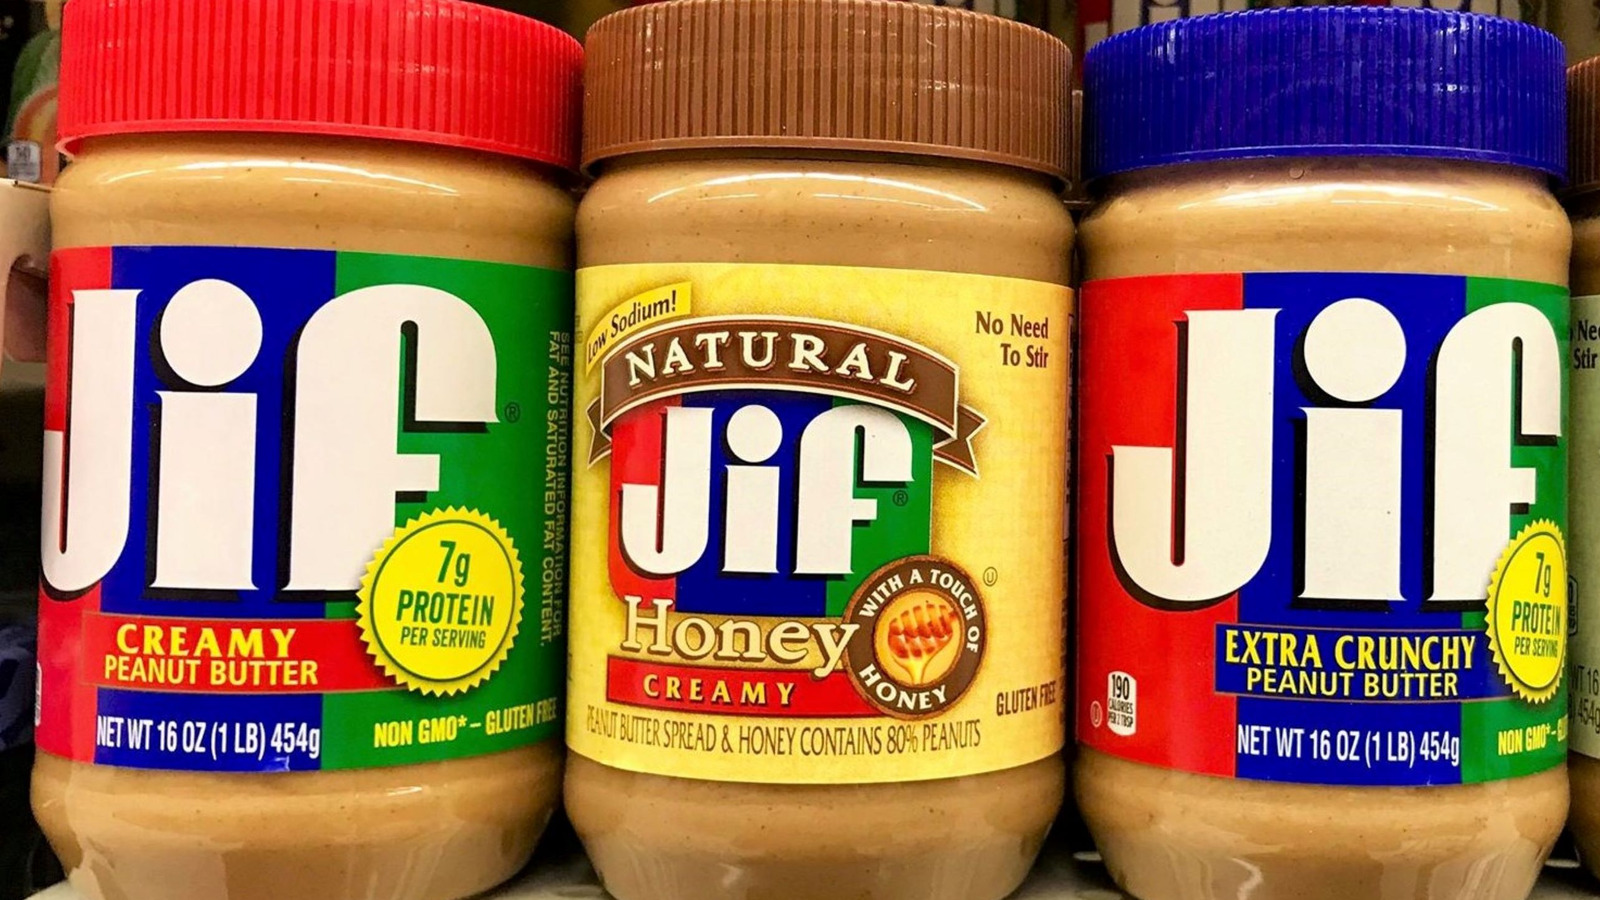 Here's How Much The Peanut Butter Recall May Have Cost J.M. Smucker